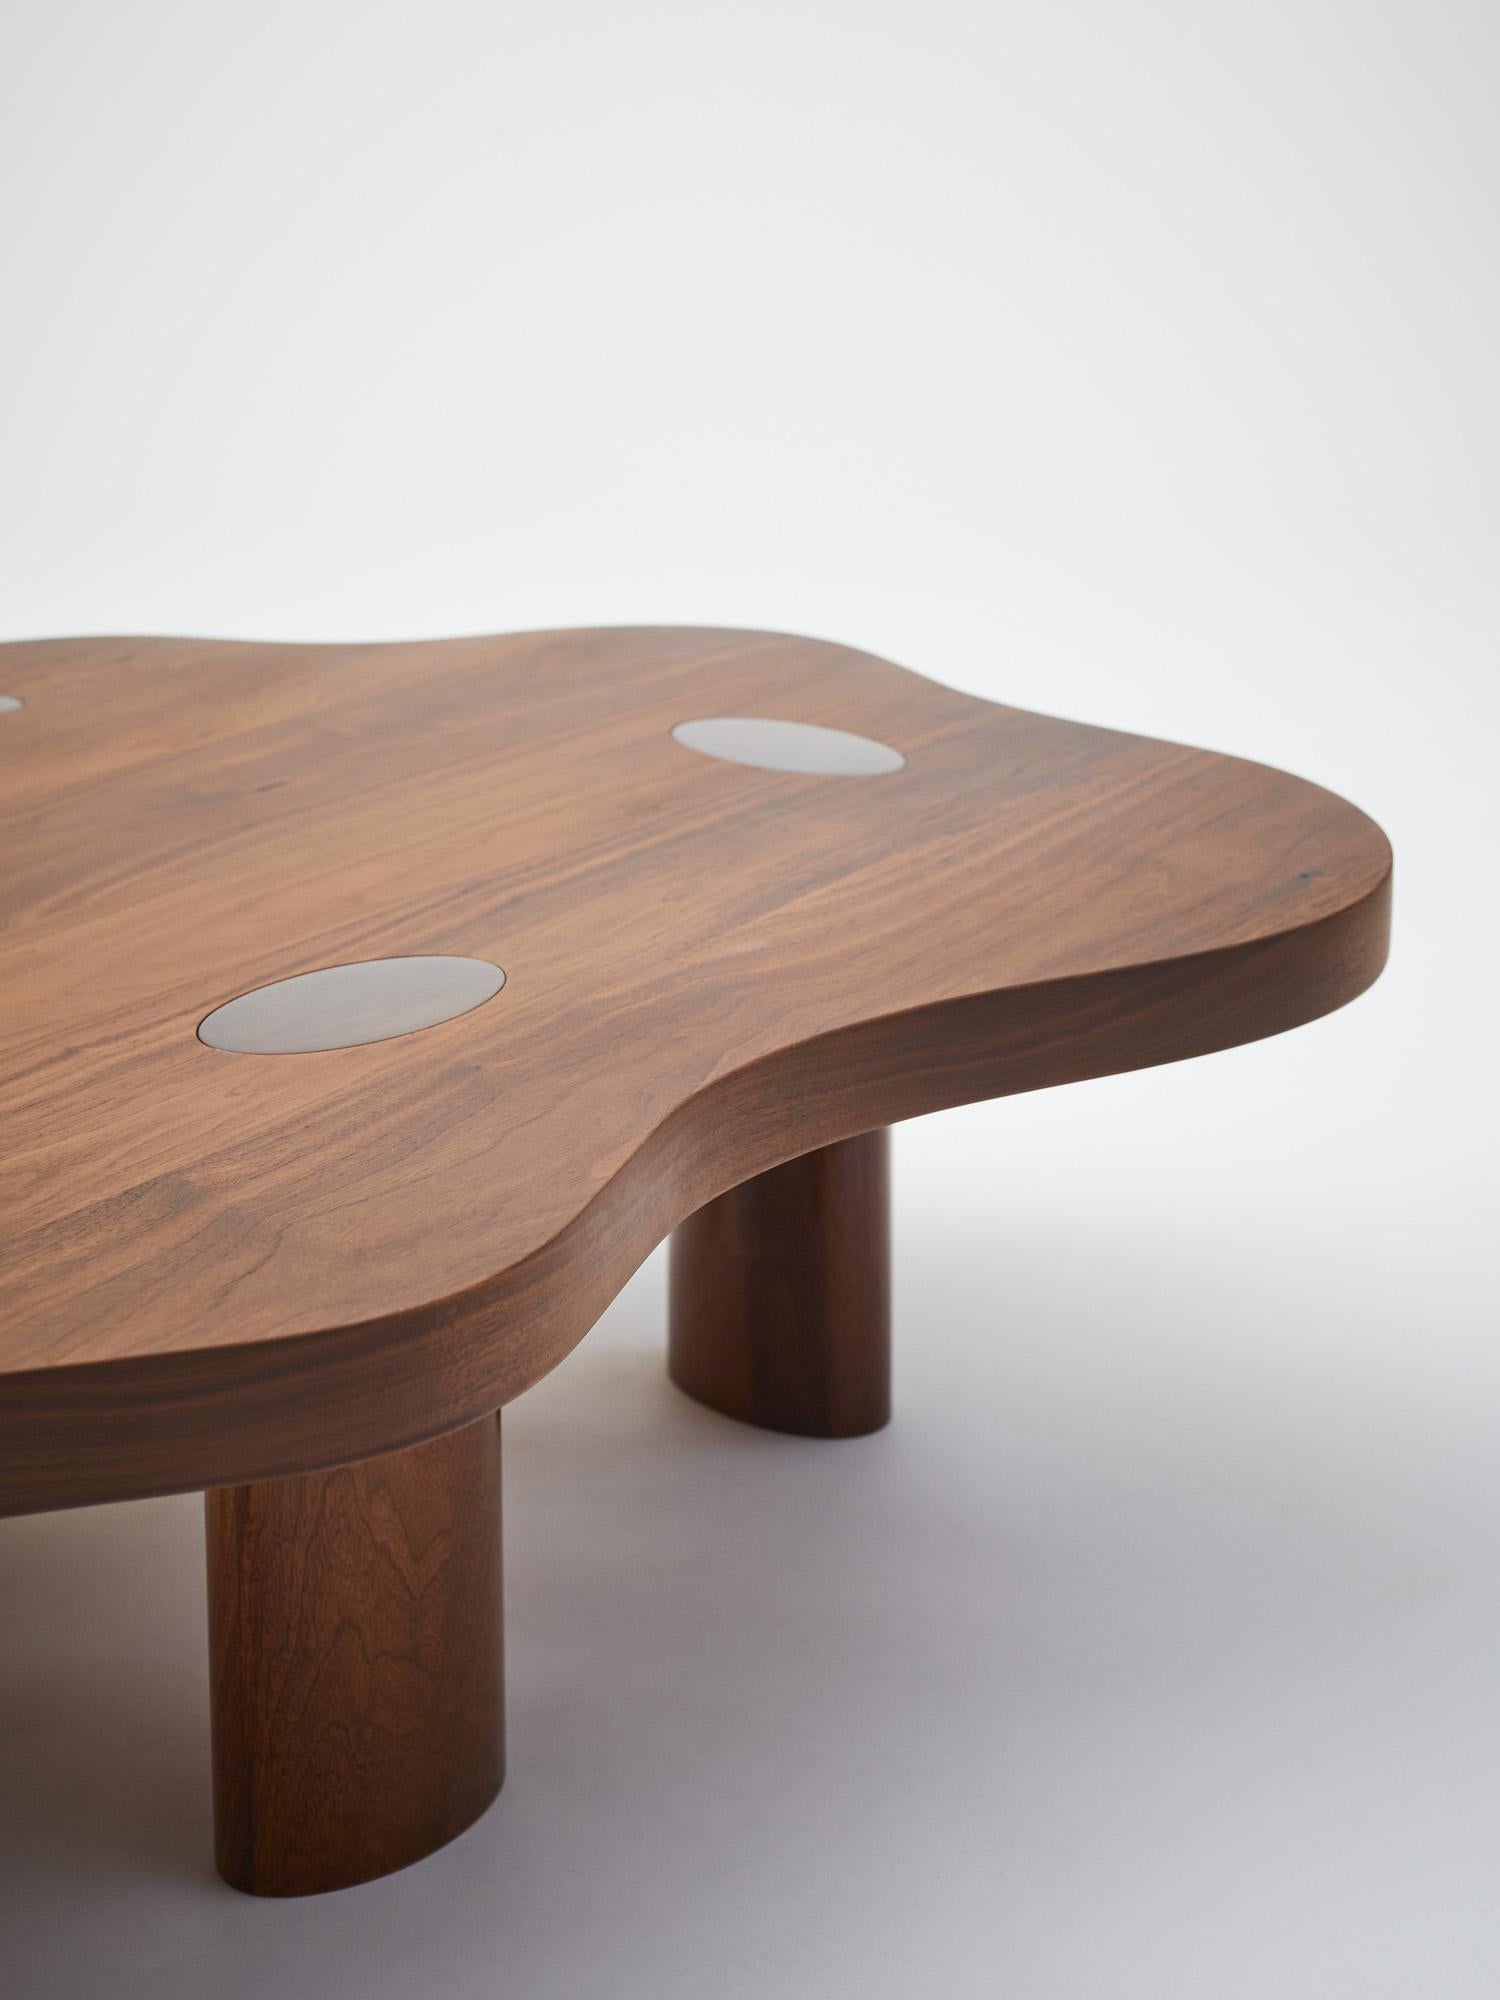 Cloud coffee table in walnut finished with a satin clear coat / hi-gloss lacquer. 

Designed by Lousie Liljencrantz, Interior Designer based in Stockholm Sweden. 
Made in Sweden.